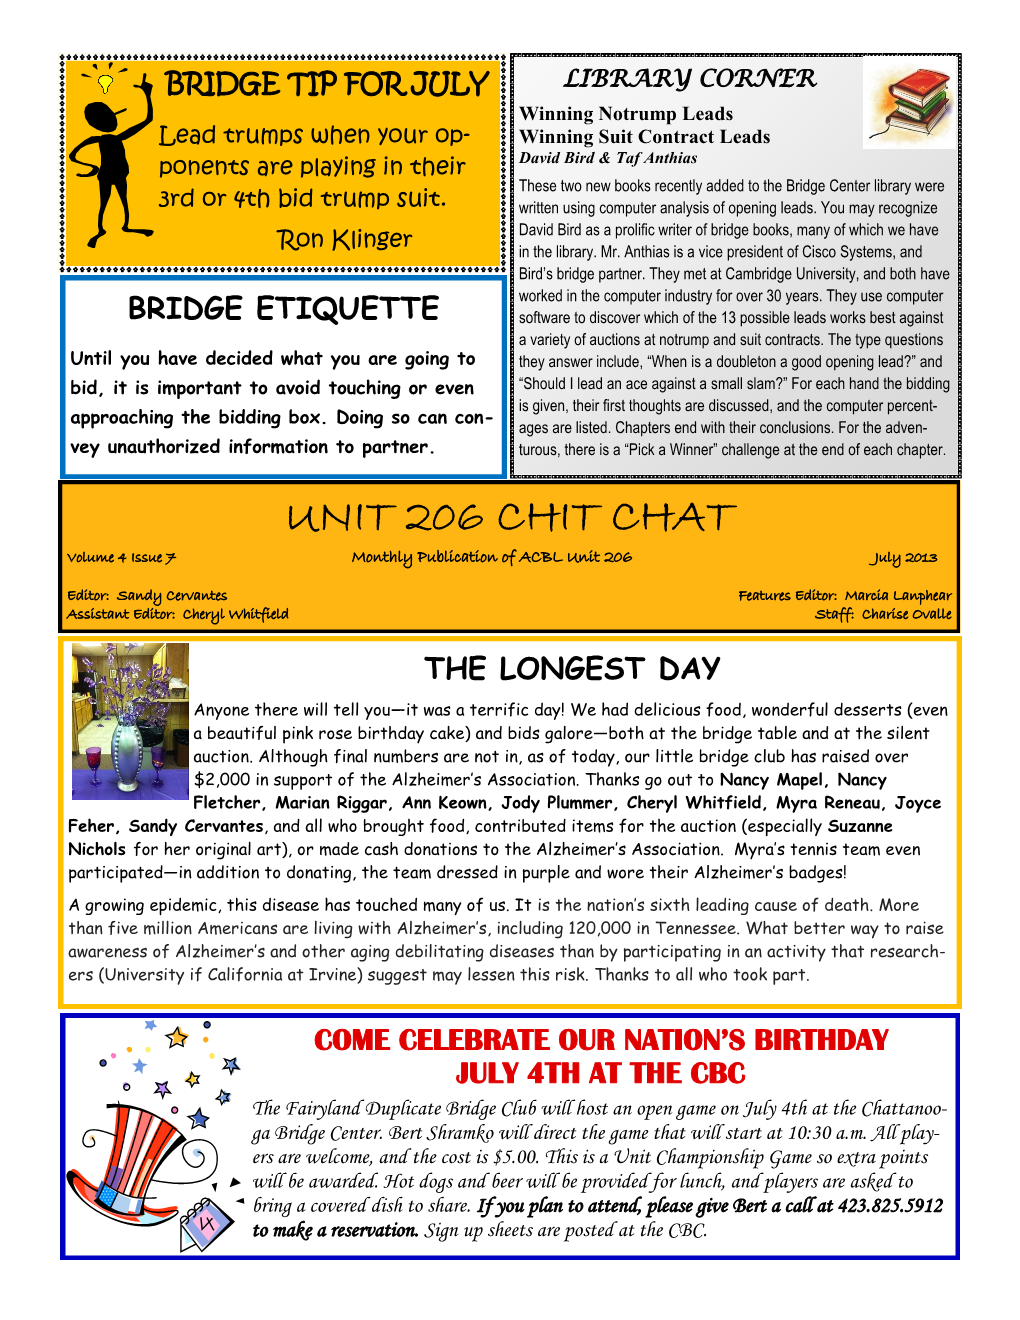 UNIT 206 CHIT CHAT Volume 4 Issue 7 Monthly Publication of ACBL Unit 206 July 2013